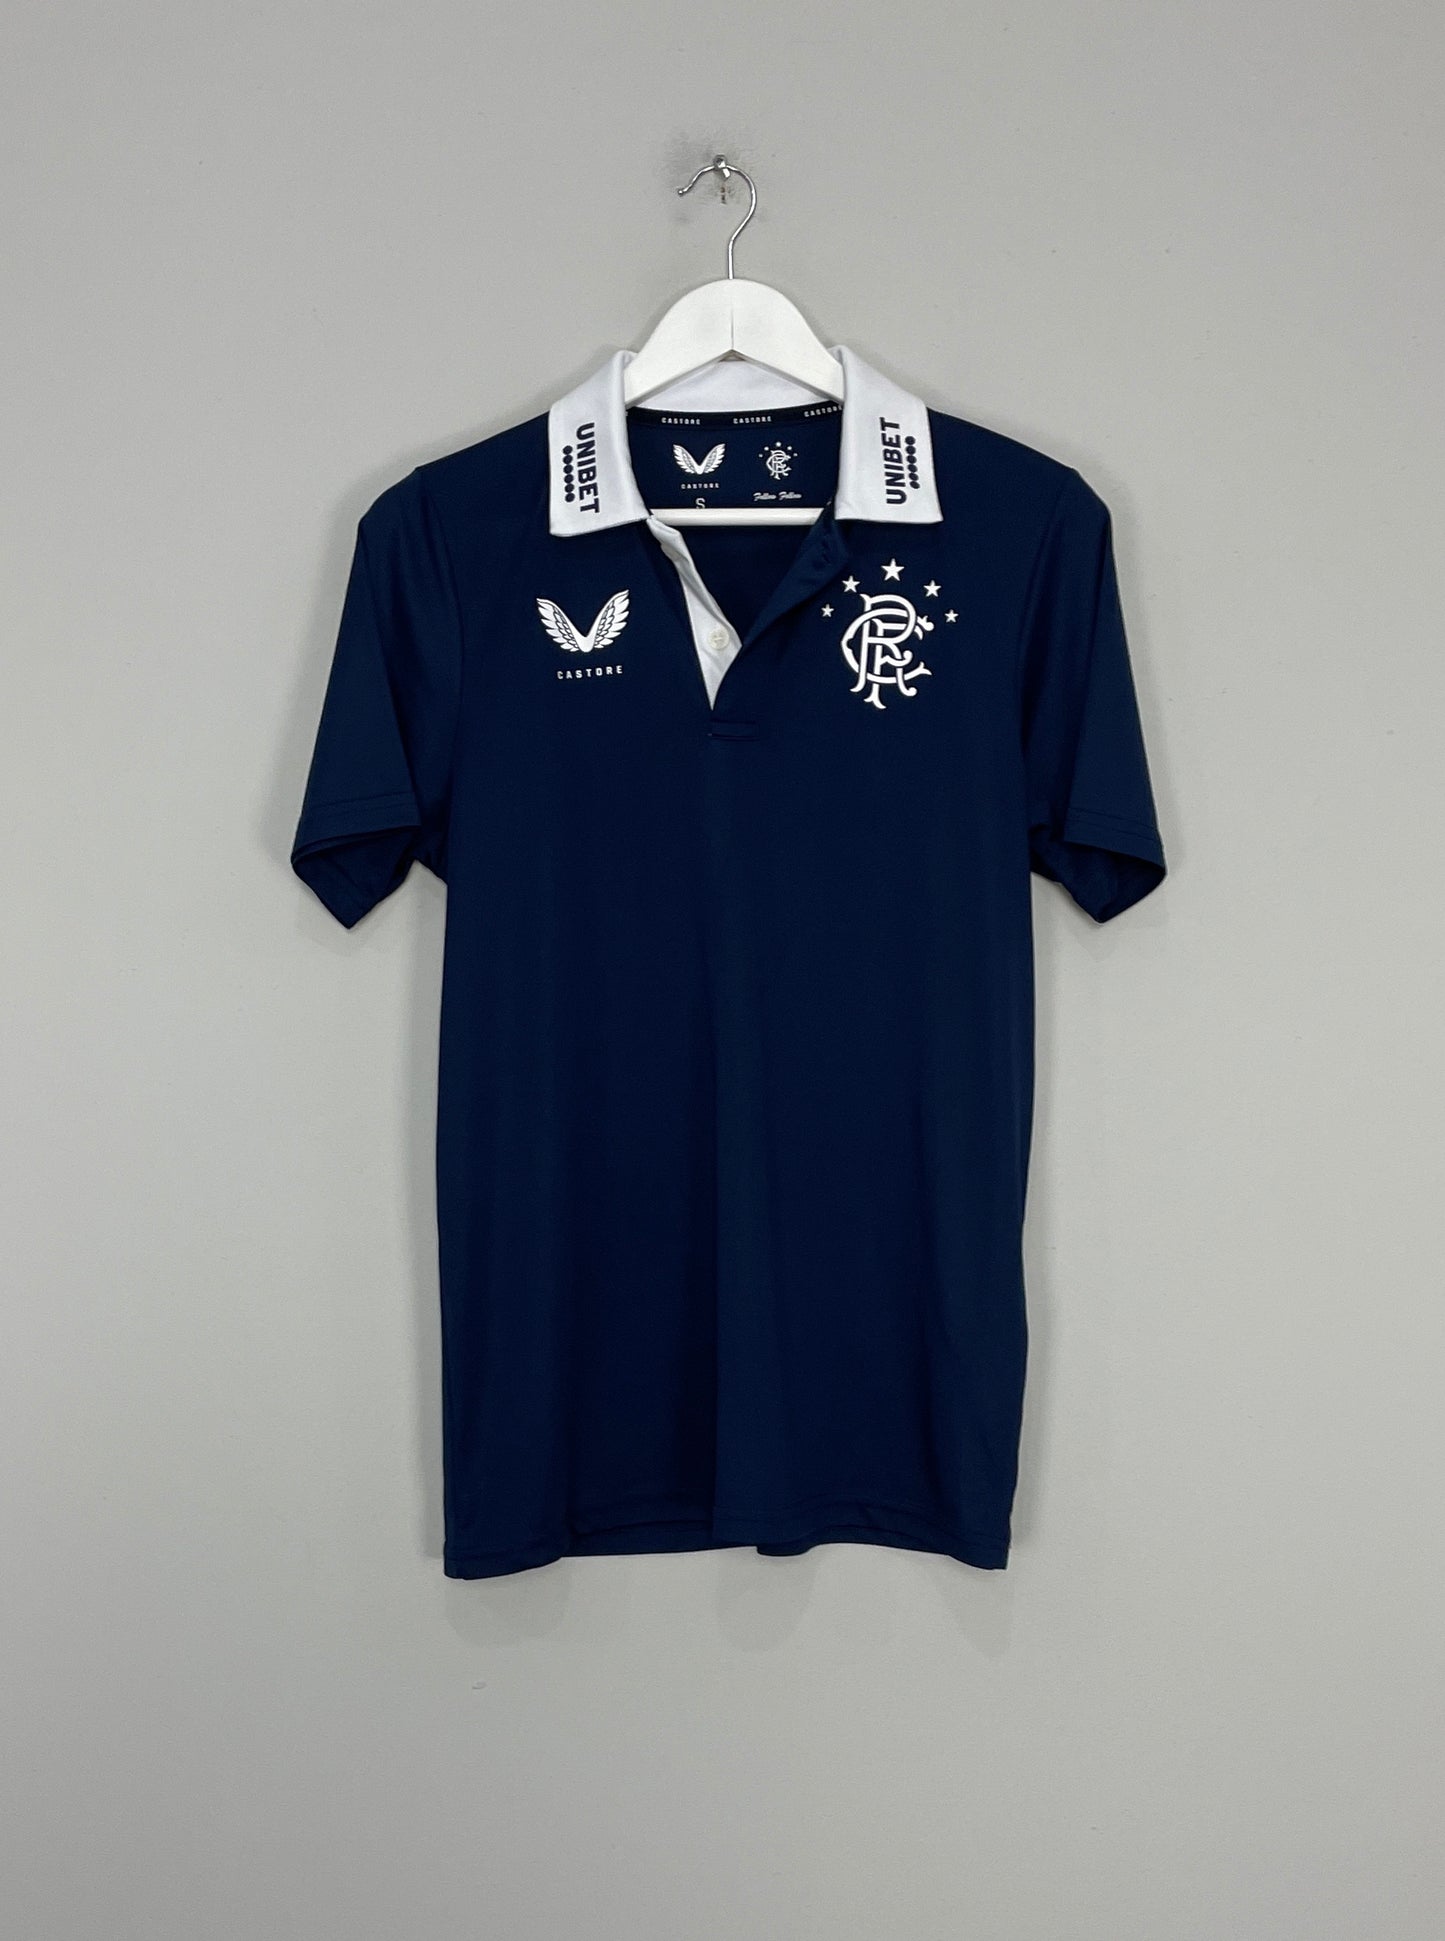 Image of the Rangers polo shirt from the 2020/21 season